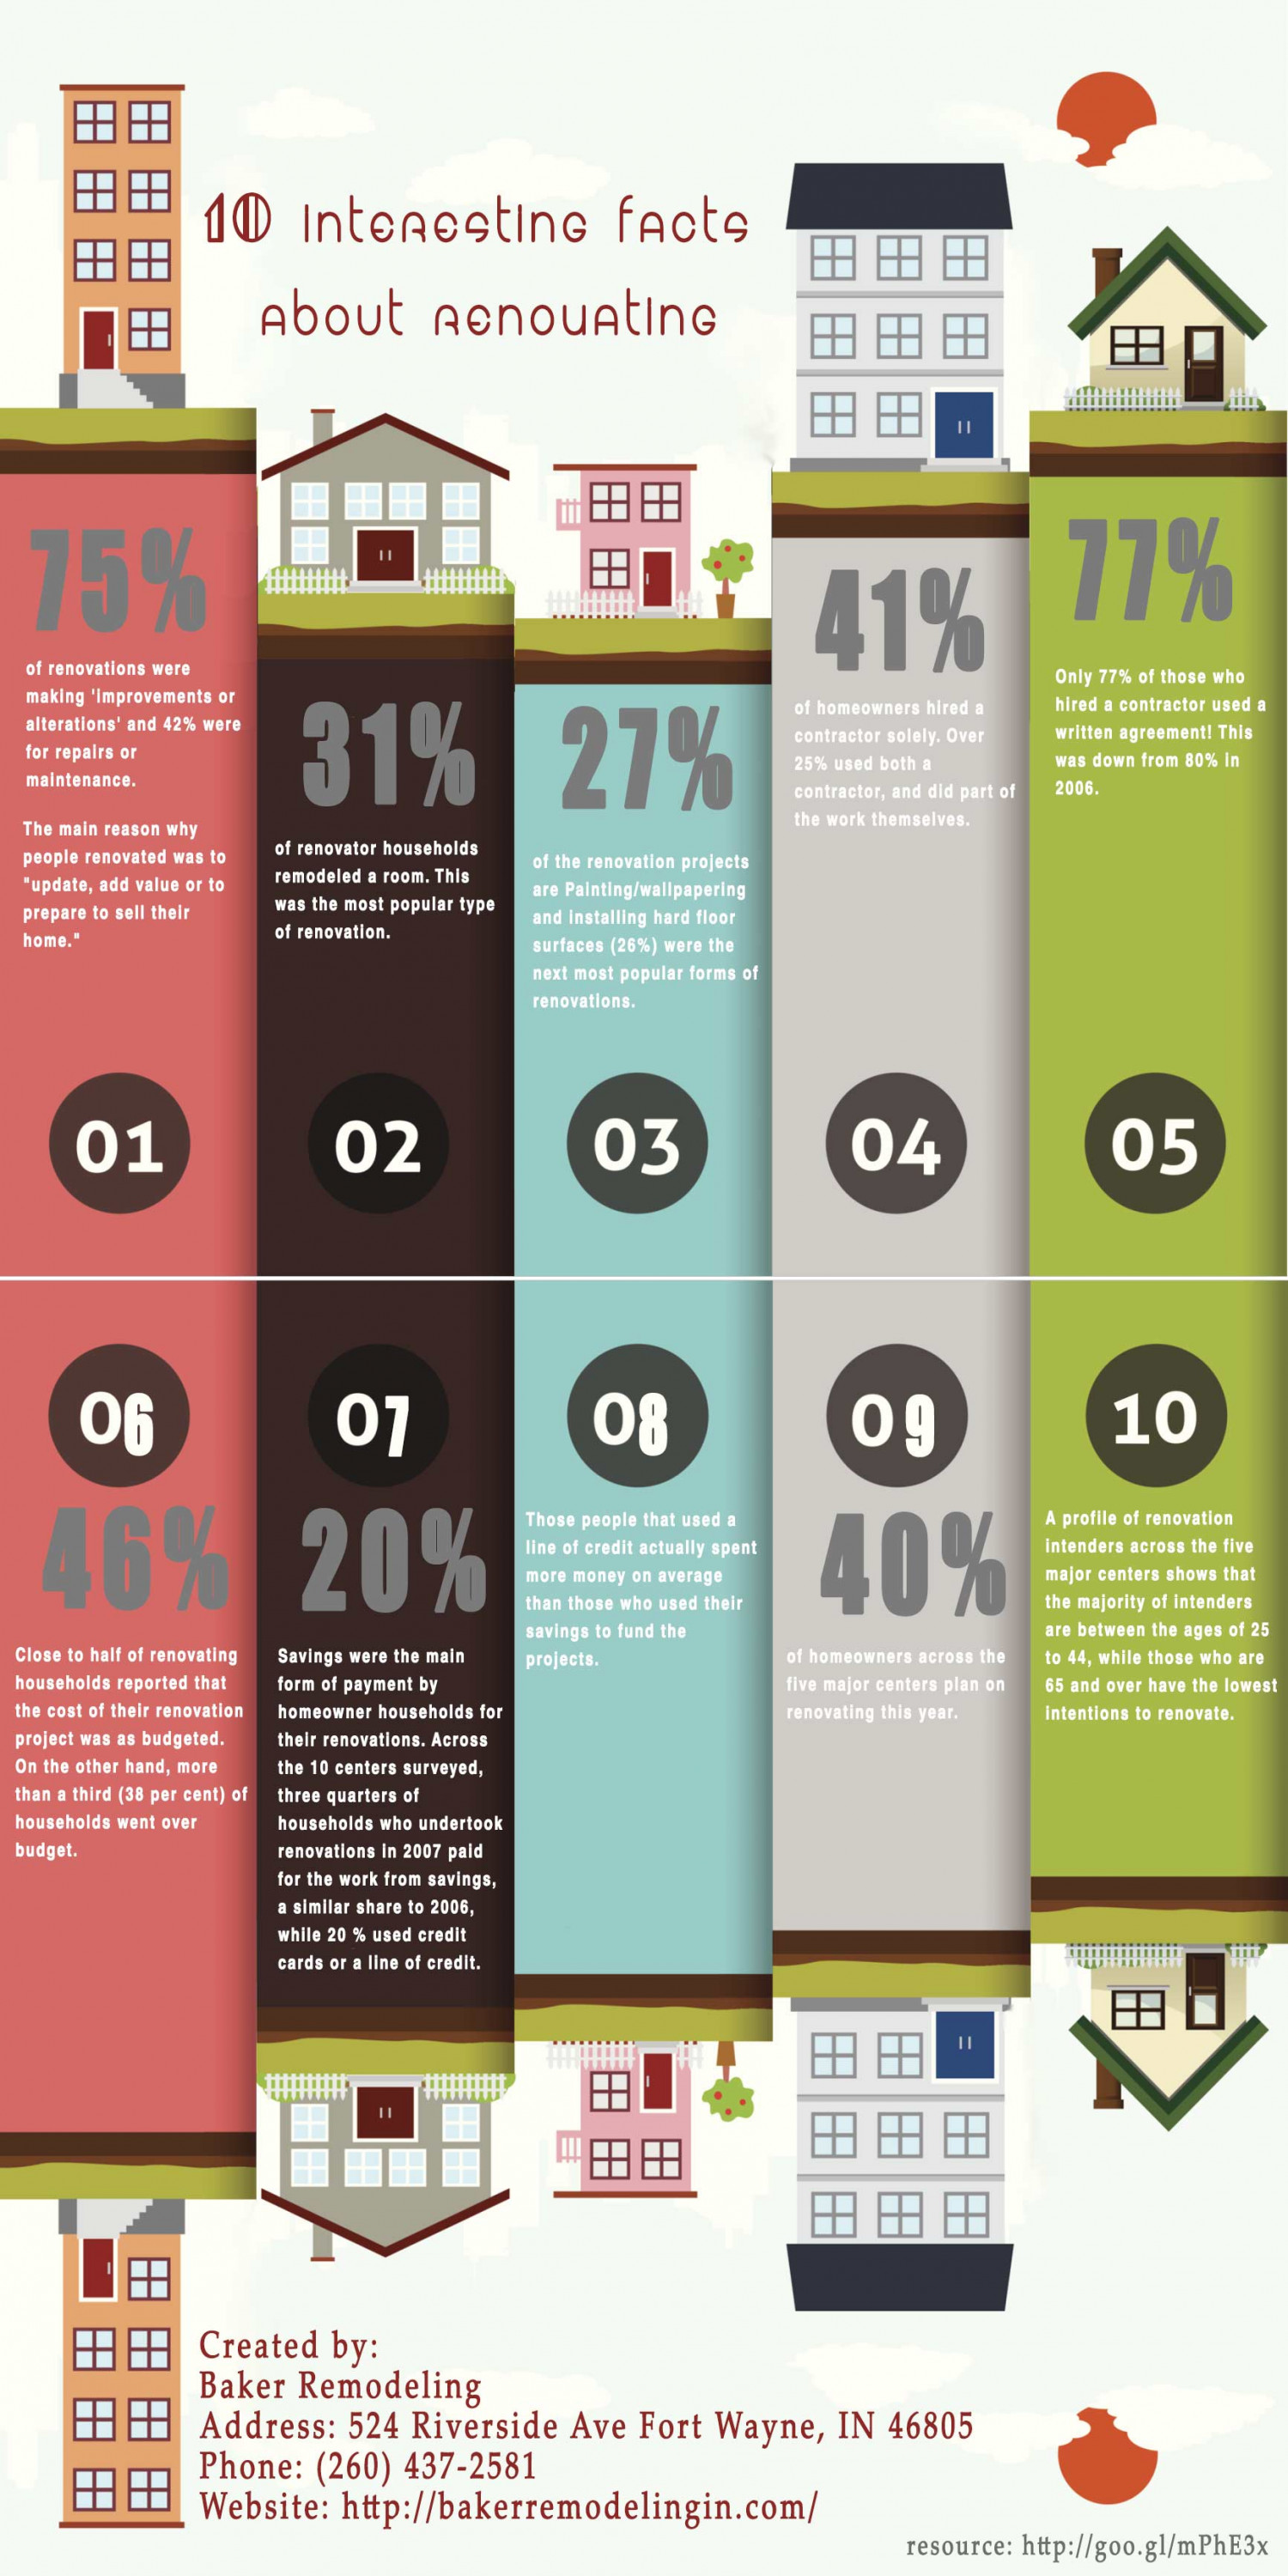 10 Interesting Facts About Renovating Infographic